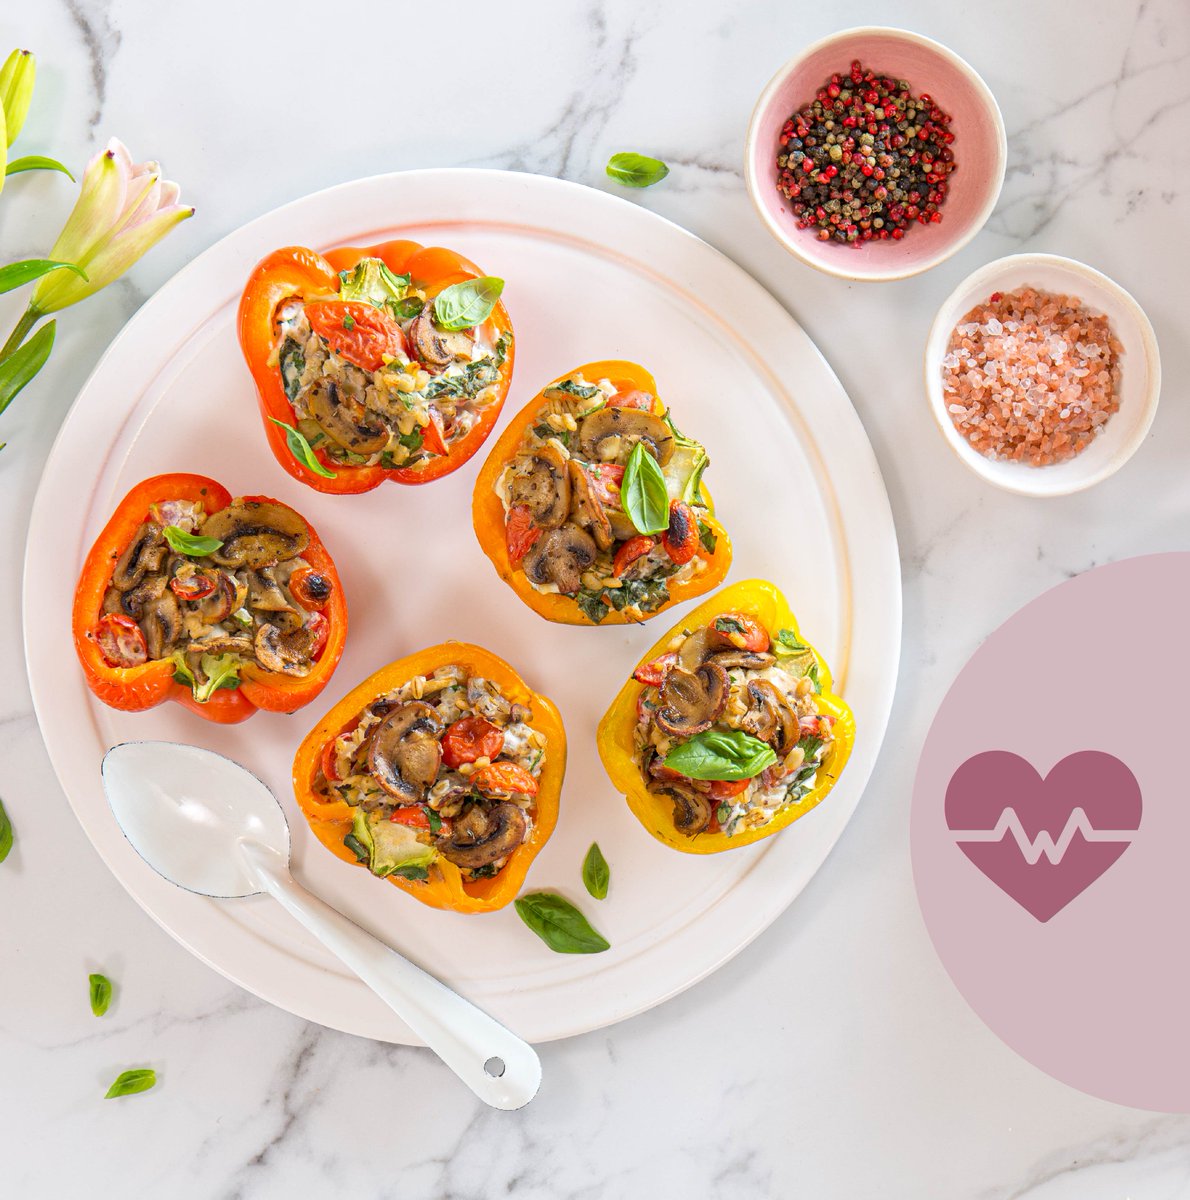 We love Portabellini Stuffed Peppers with Tomato, Basil & Barley bit.ly/35RFskg, and a little of what you like is (really!) good for you!

#BreastCancerSupporter #superfoodmushrooms #foodforthesoul #stuffedpeppers